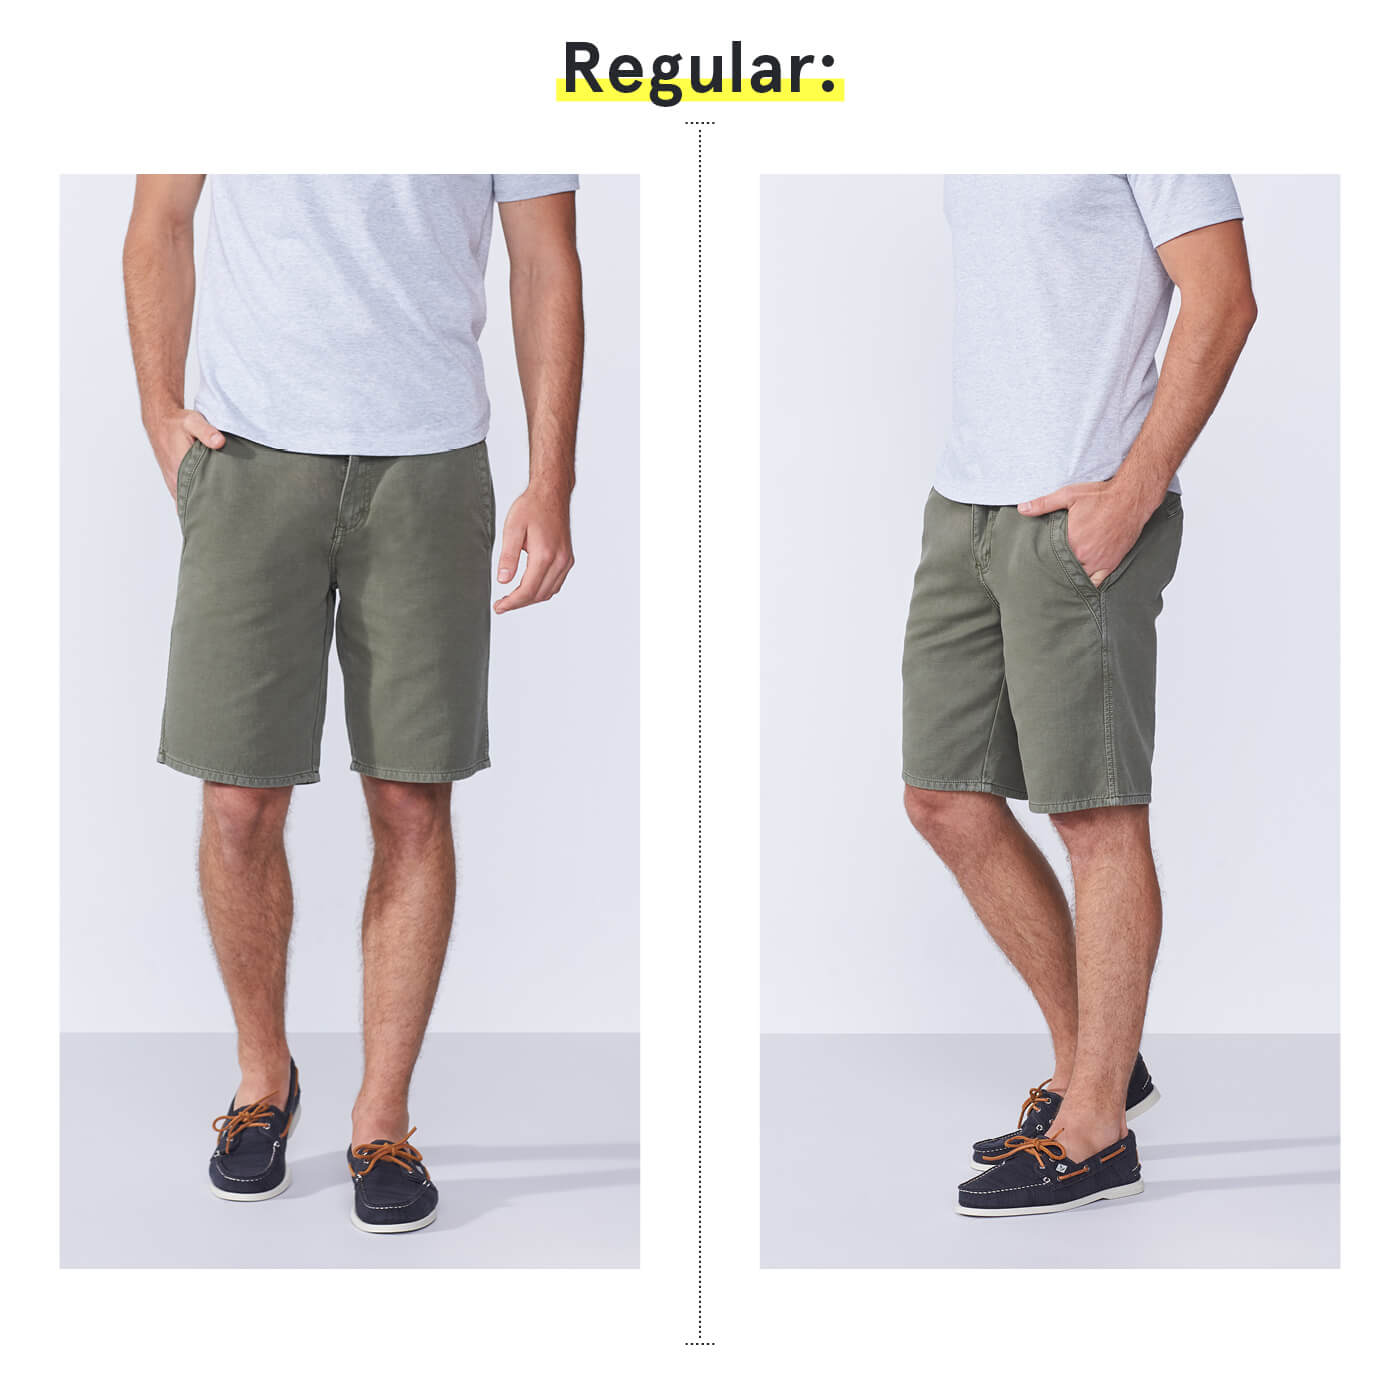 pants for guys with skinny legs